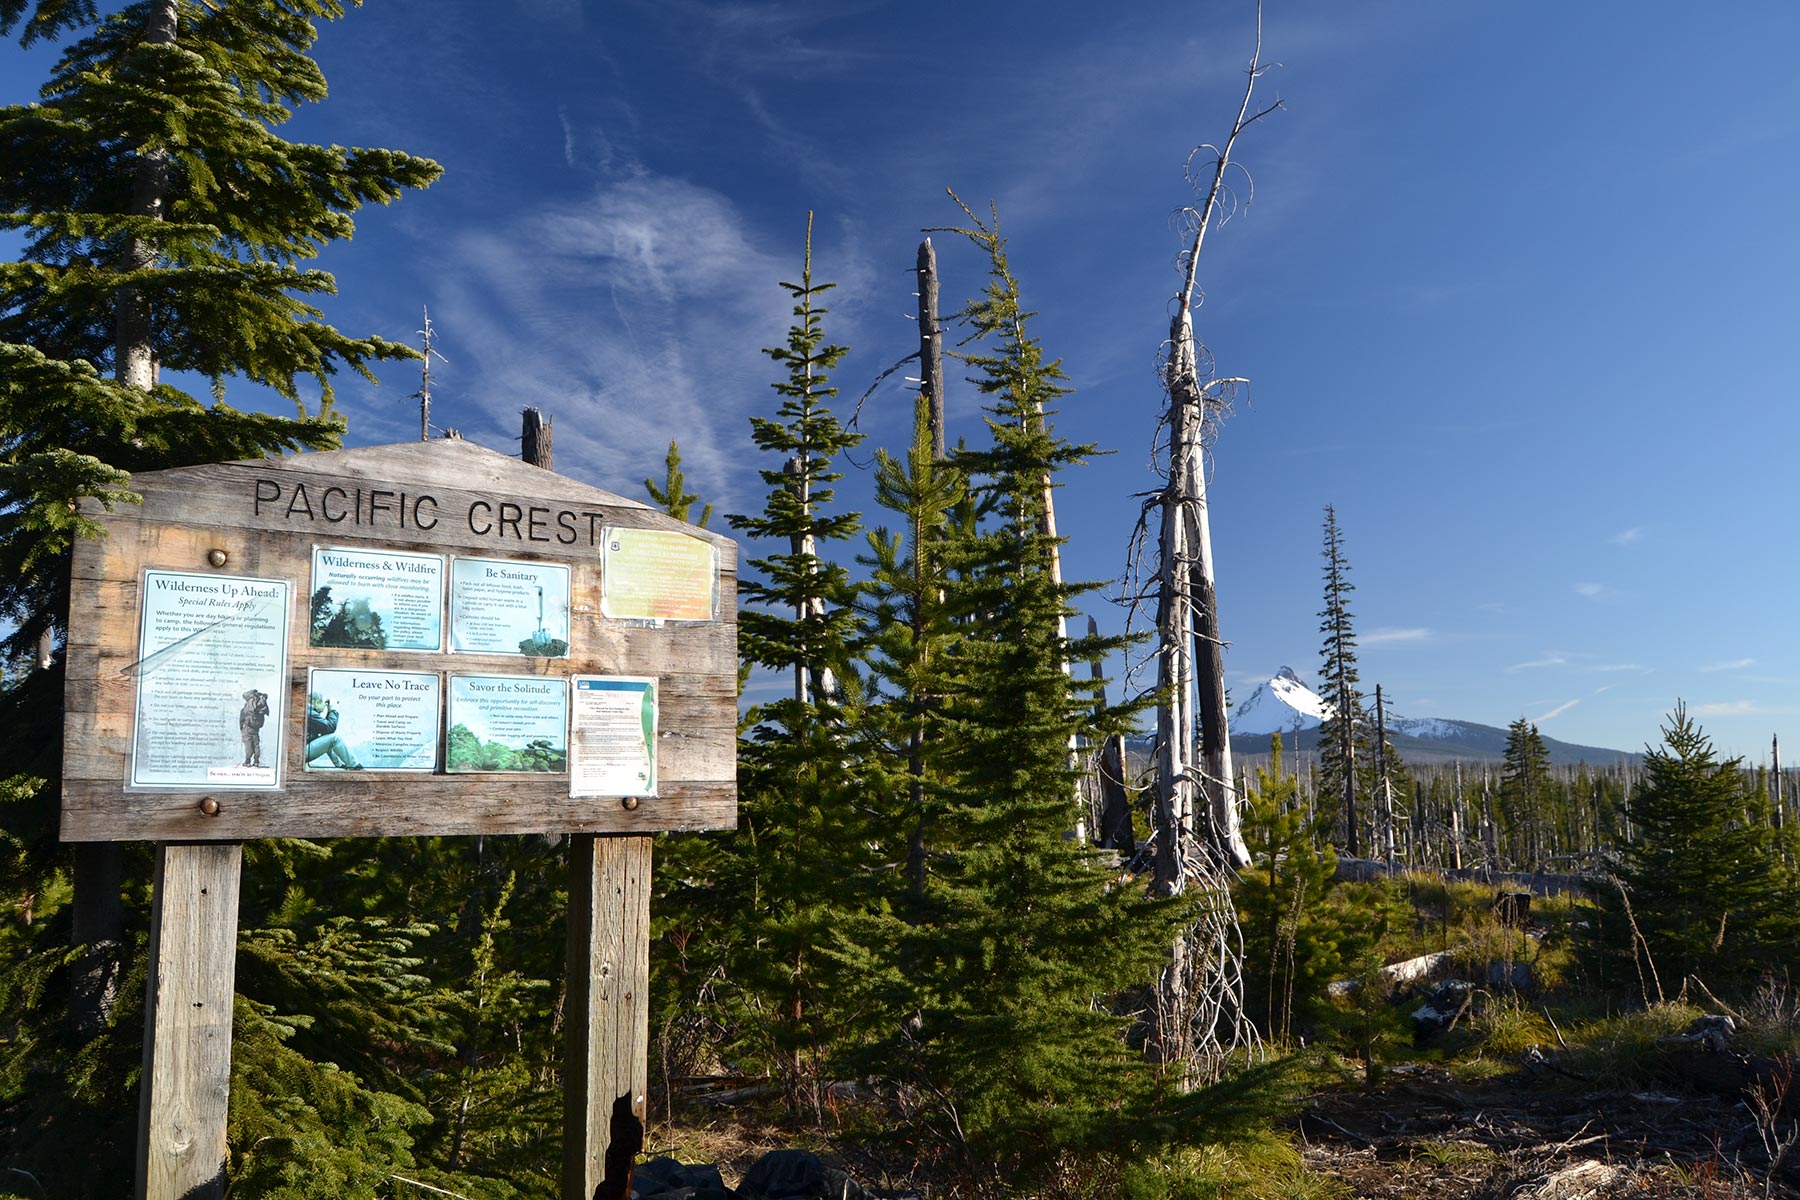 Trailhead at Santiam Pass - A Twisting Journey-Oregon Backroads Guide to the PCT